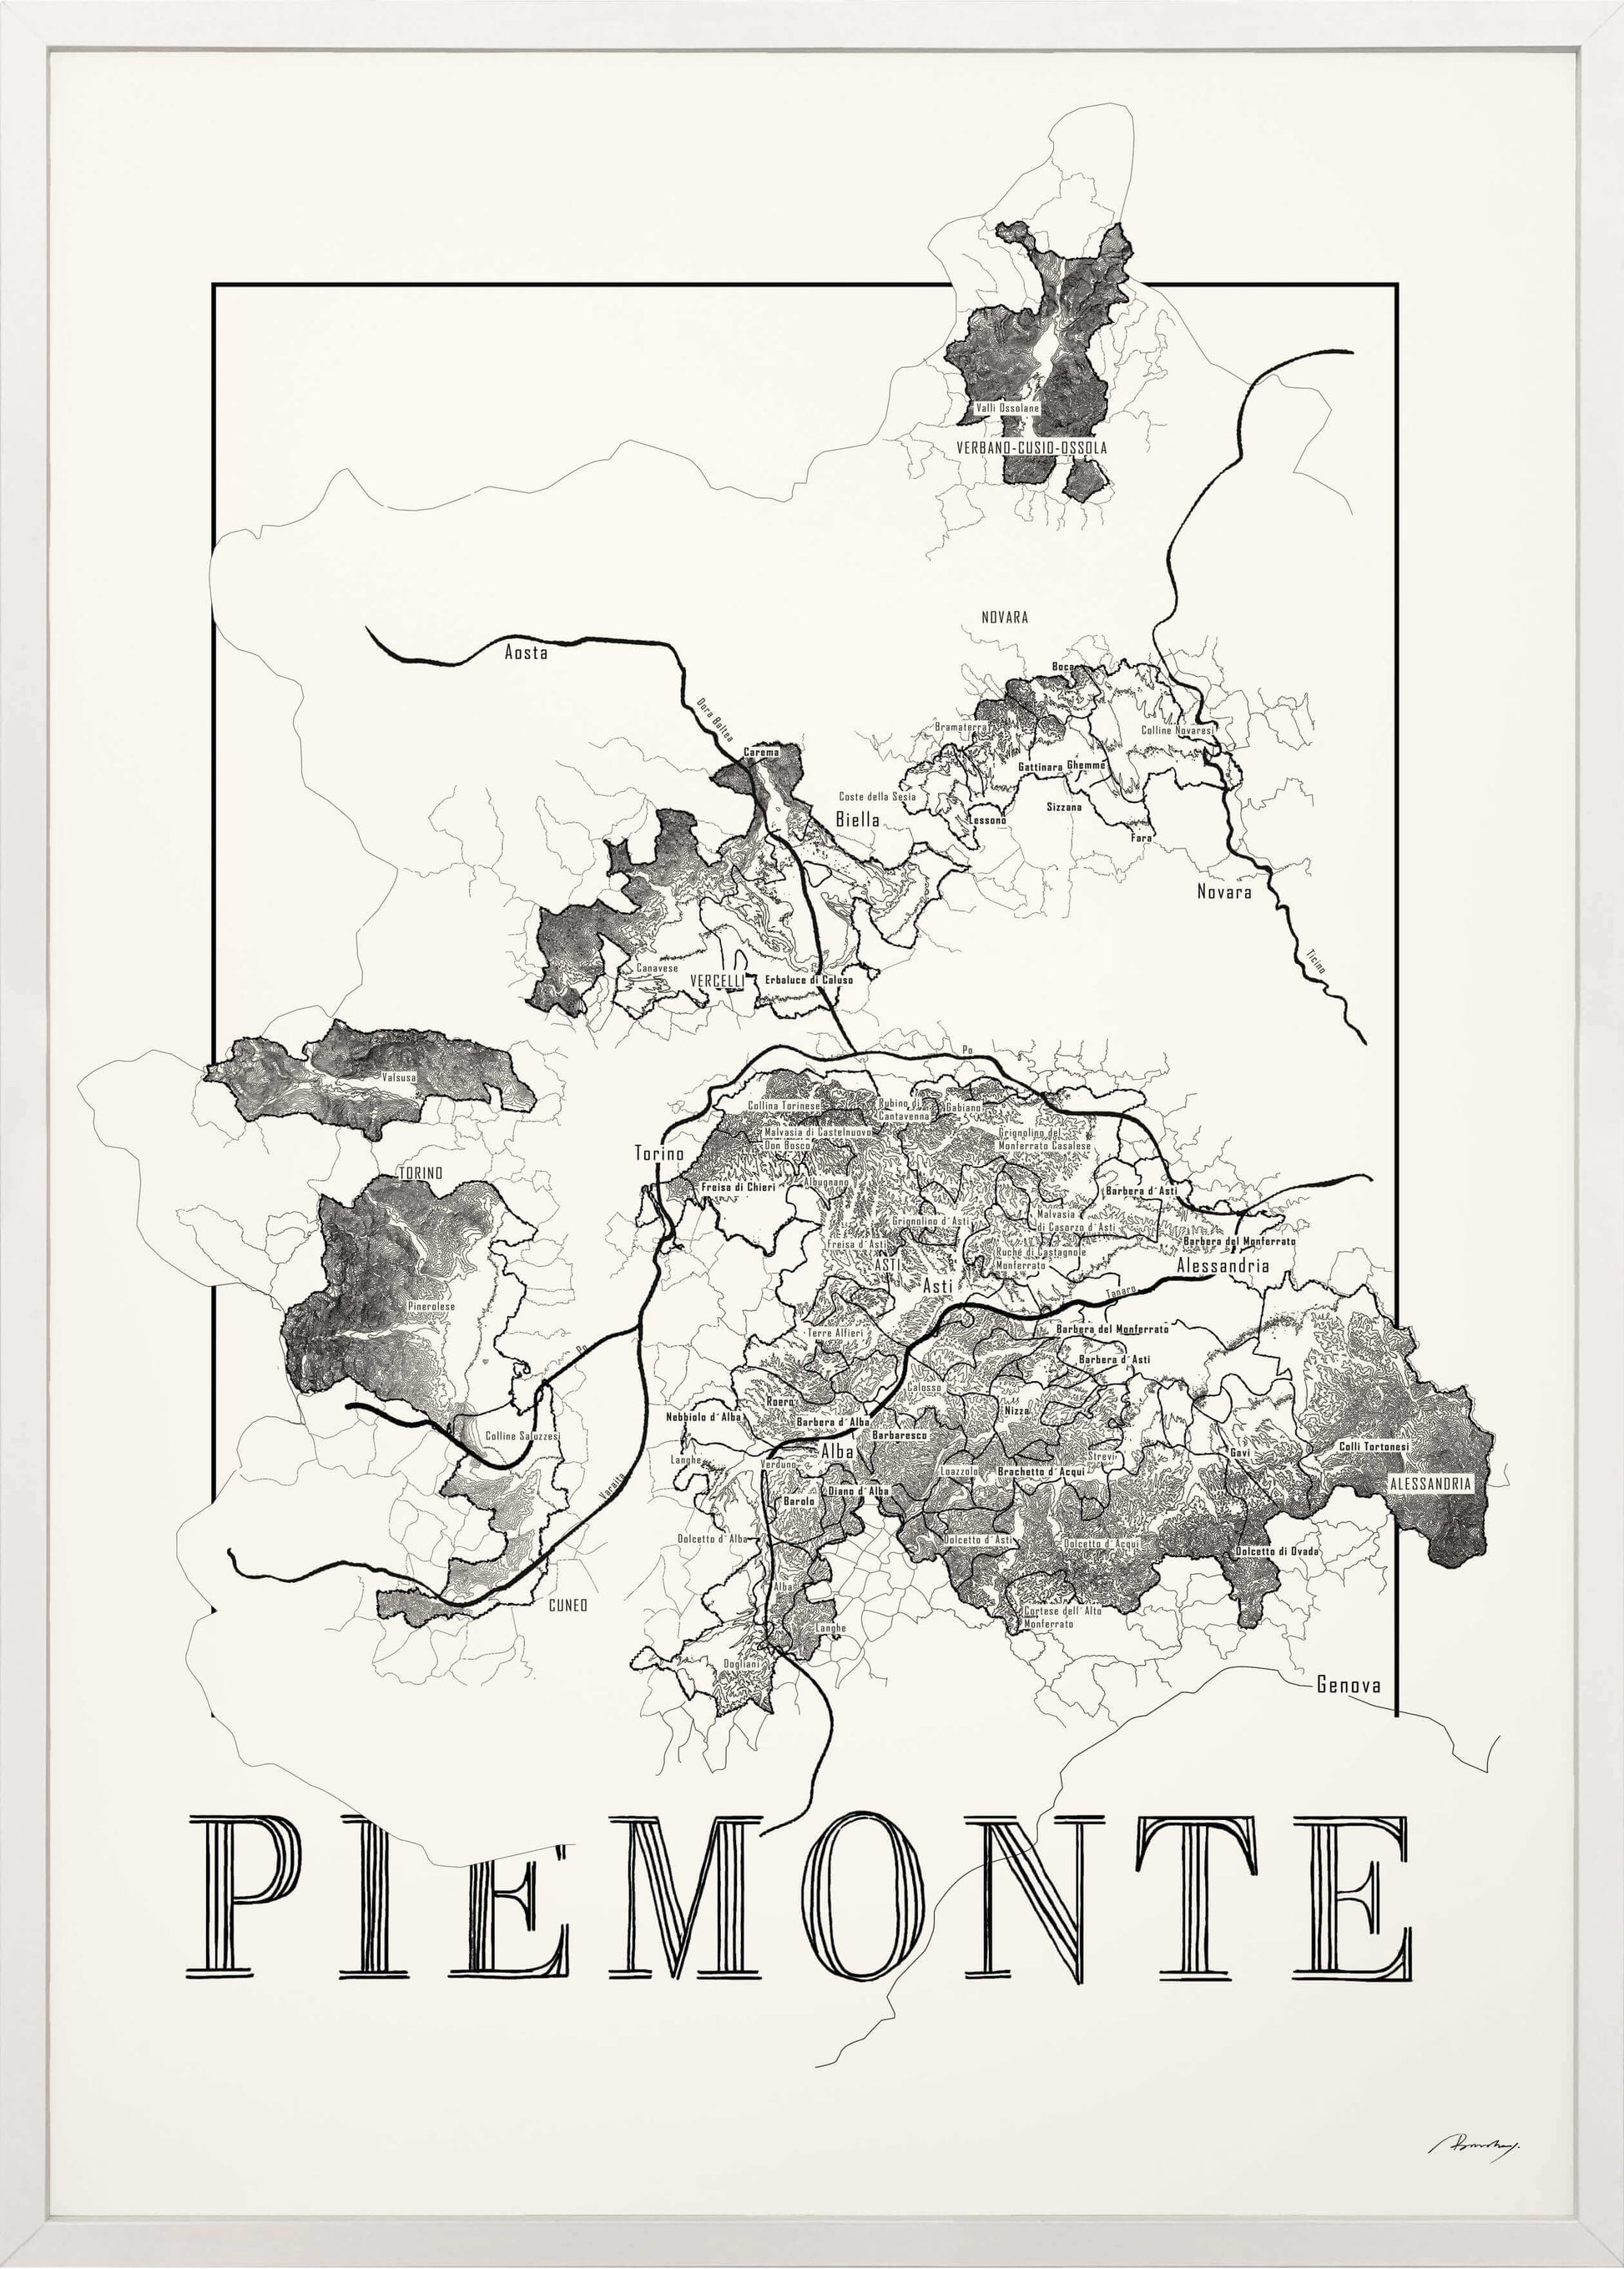 Piemonte Wine map poster. Exclusive wine map posters. Premium quality wine maps printed on environmentally friendly FSC marked paper. 